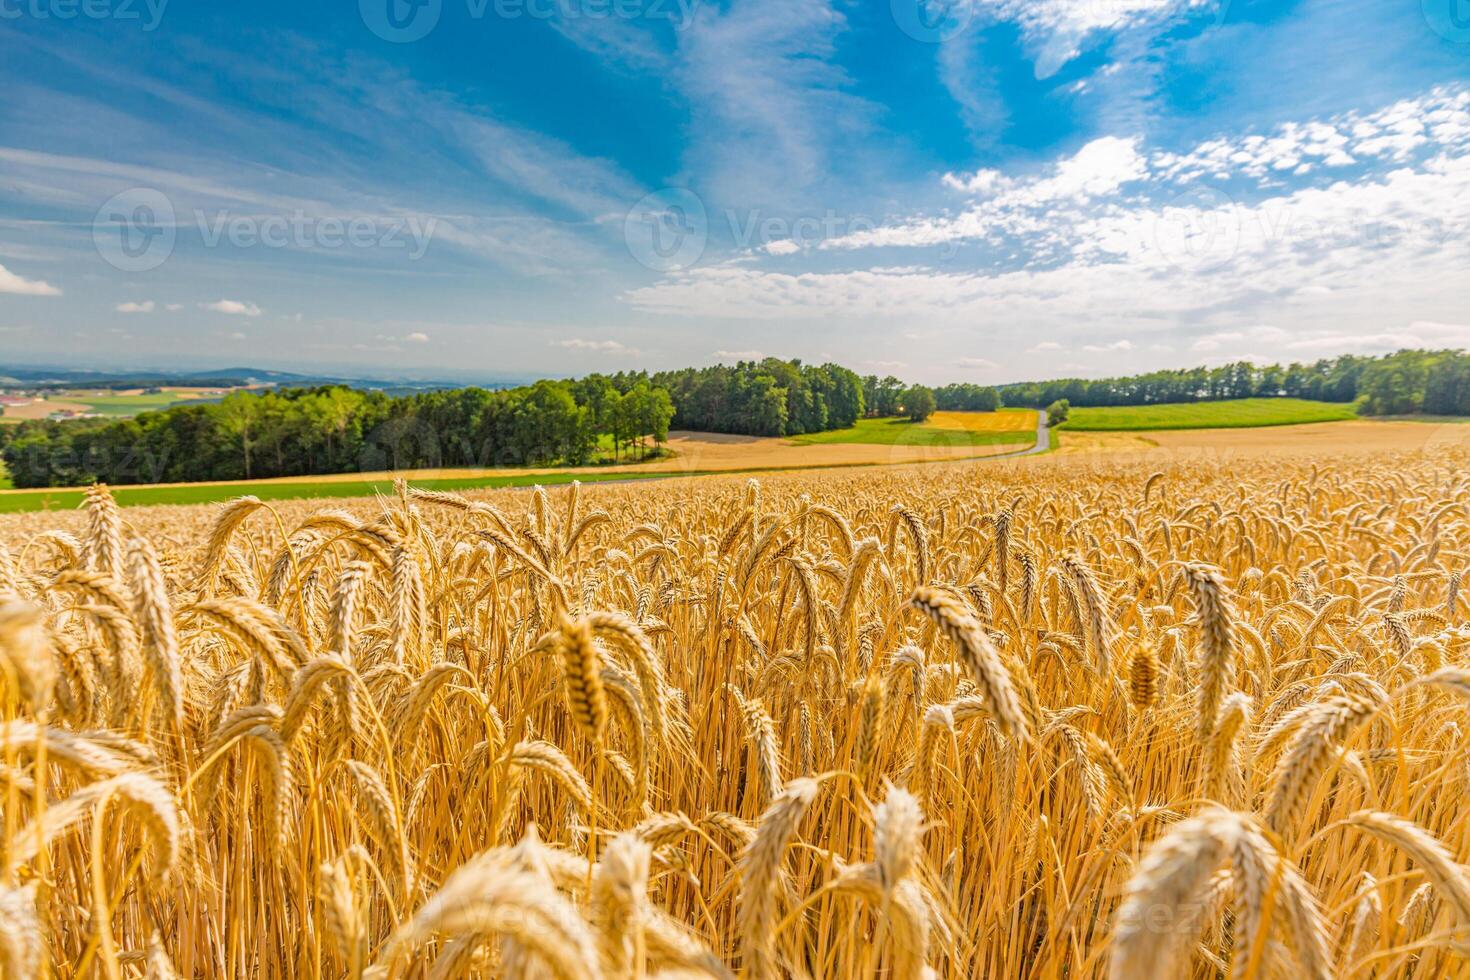 Golden wheat field and sunset sky, landscape of agricultural grain crops in harvest season, panorama. Agriculture, agronomy and farming background. Summer countryside landscape with field of wheat photo